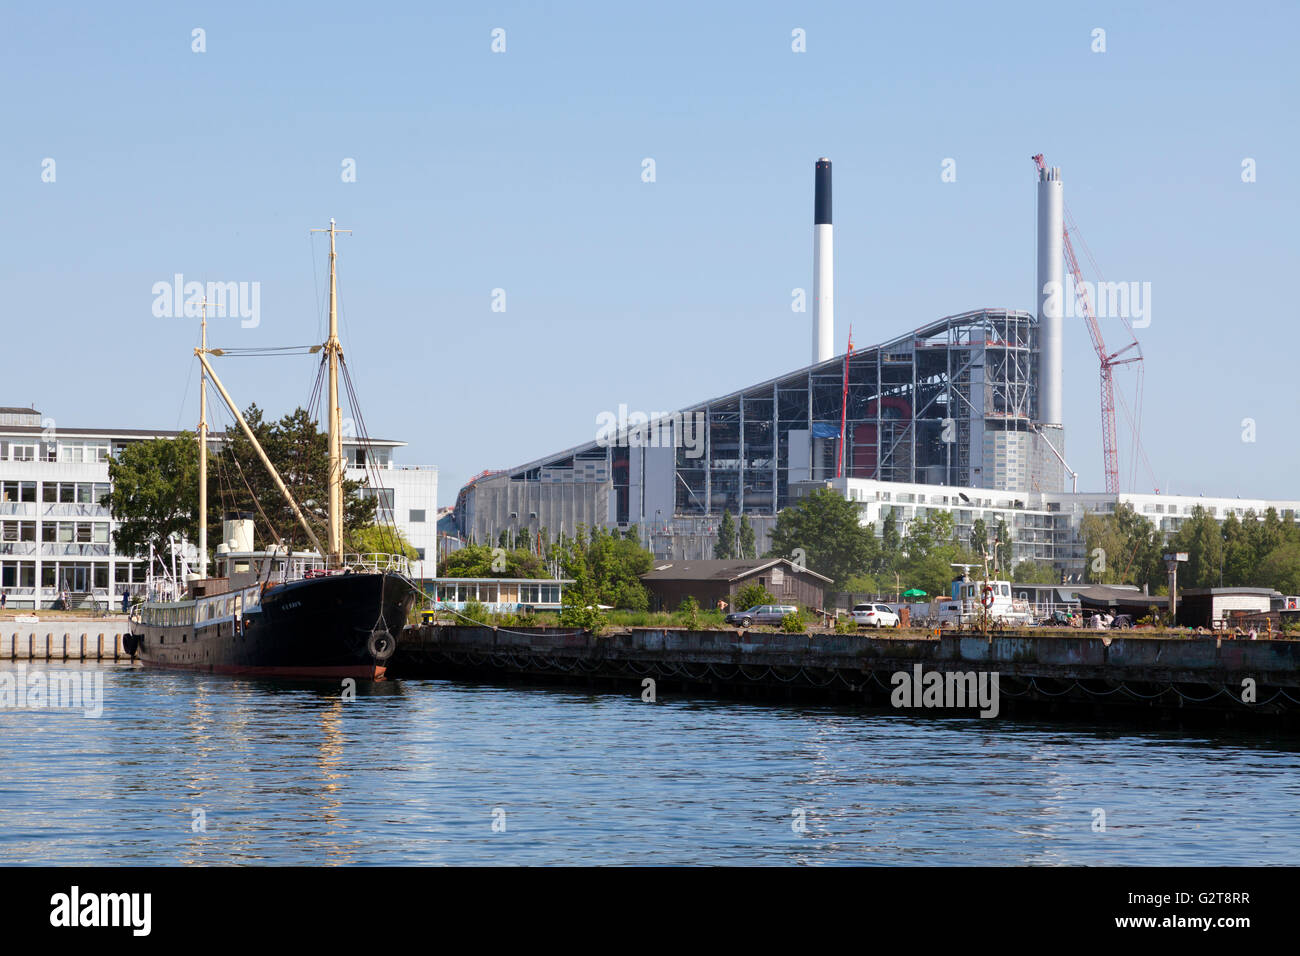 The new Amager Slope, CopenHill, and waste-to-energy power plant designed by Bjarke Ingels seen from the inner harbour. Stock Photo